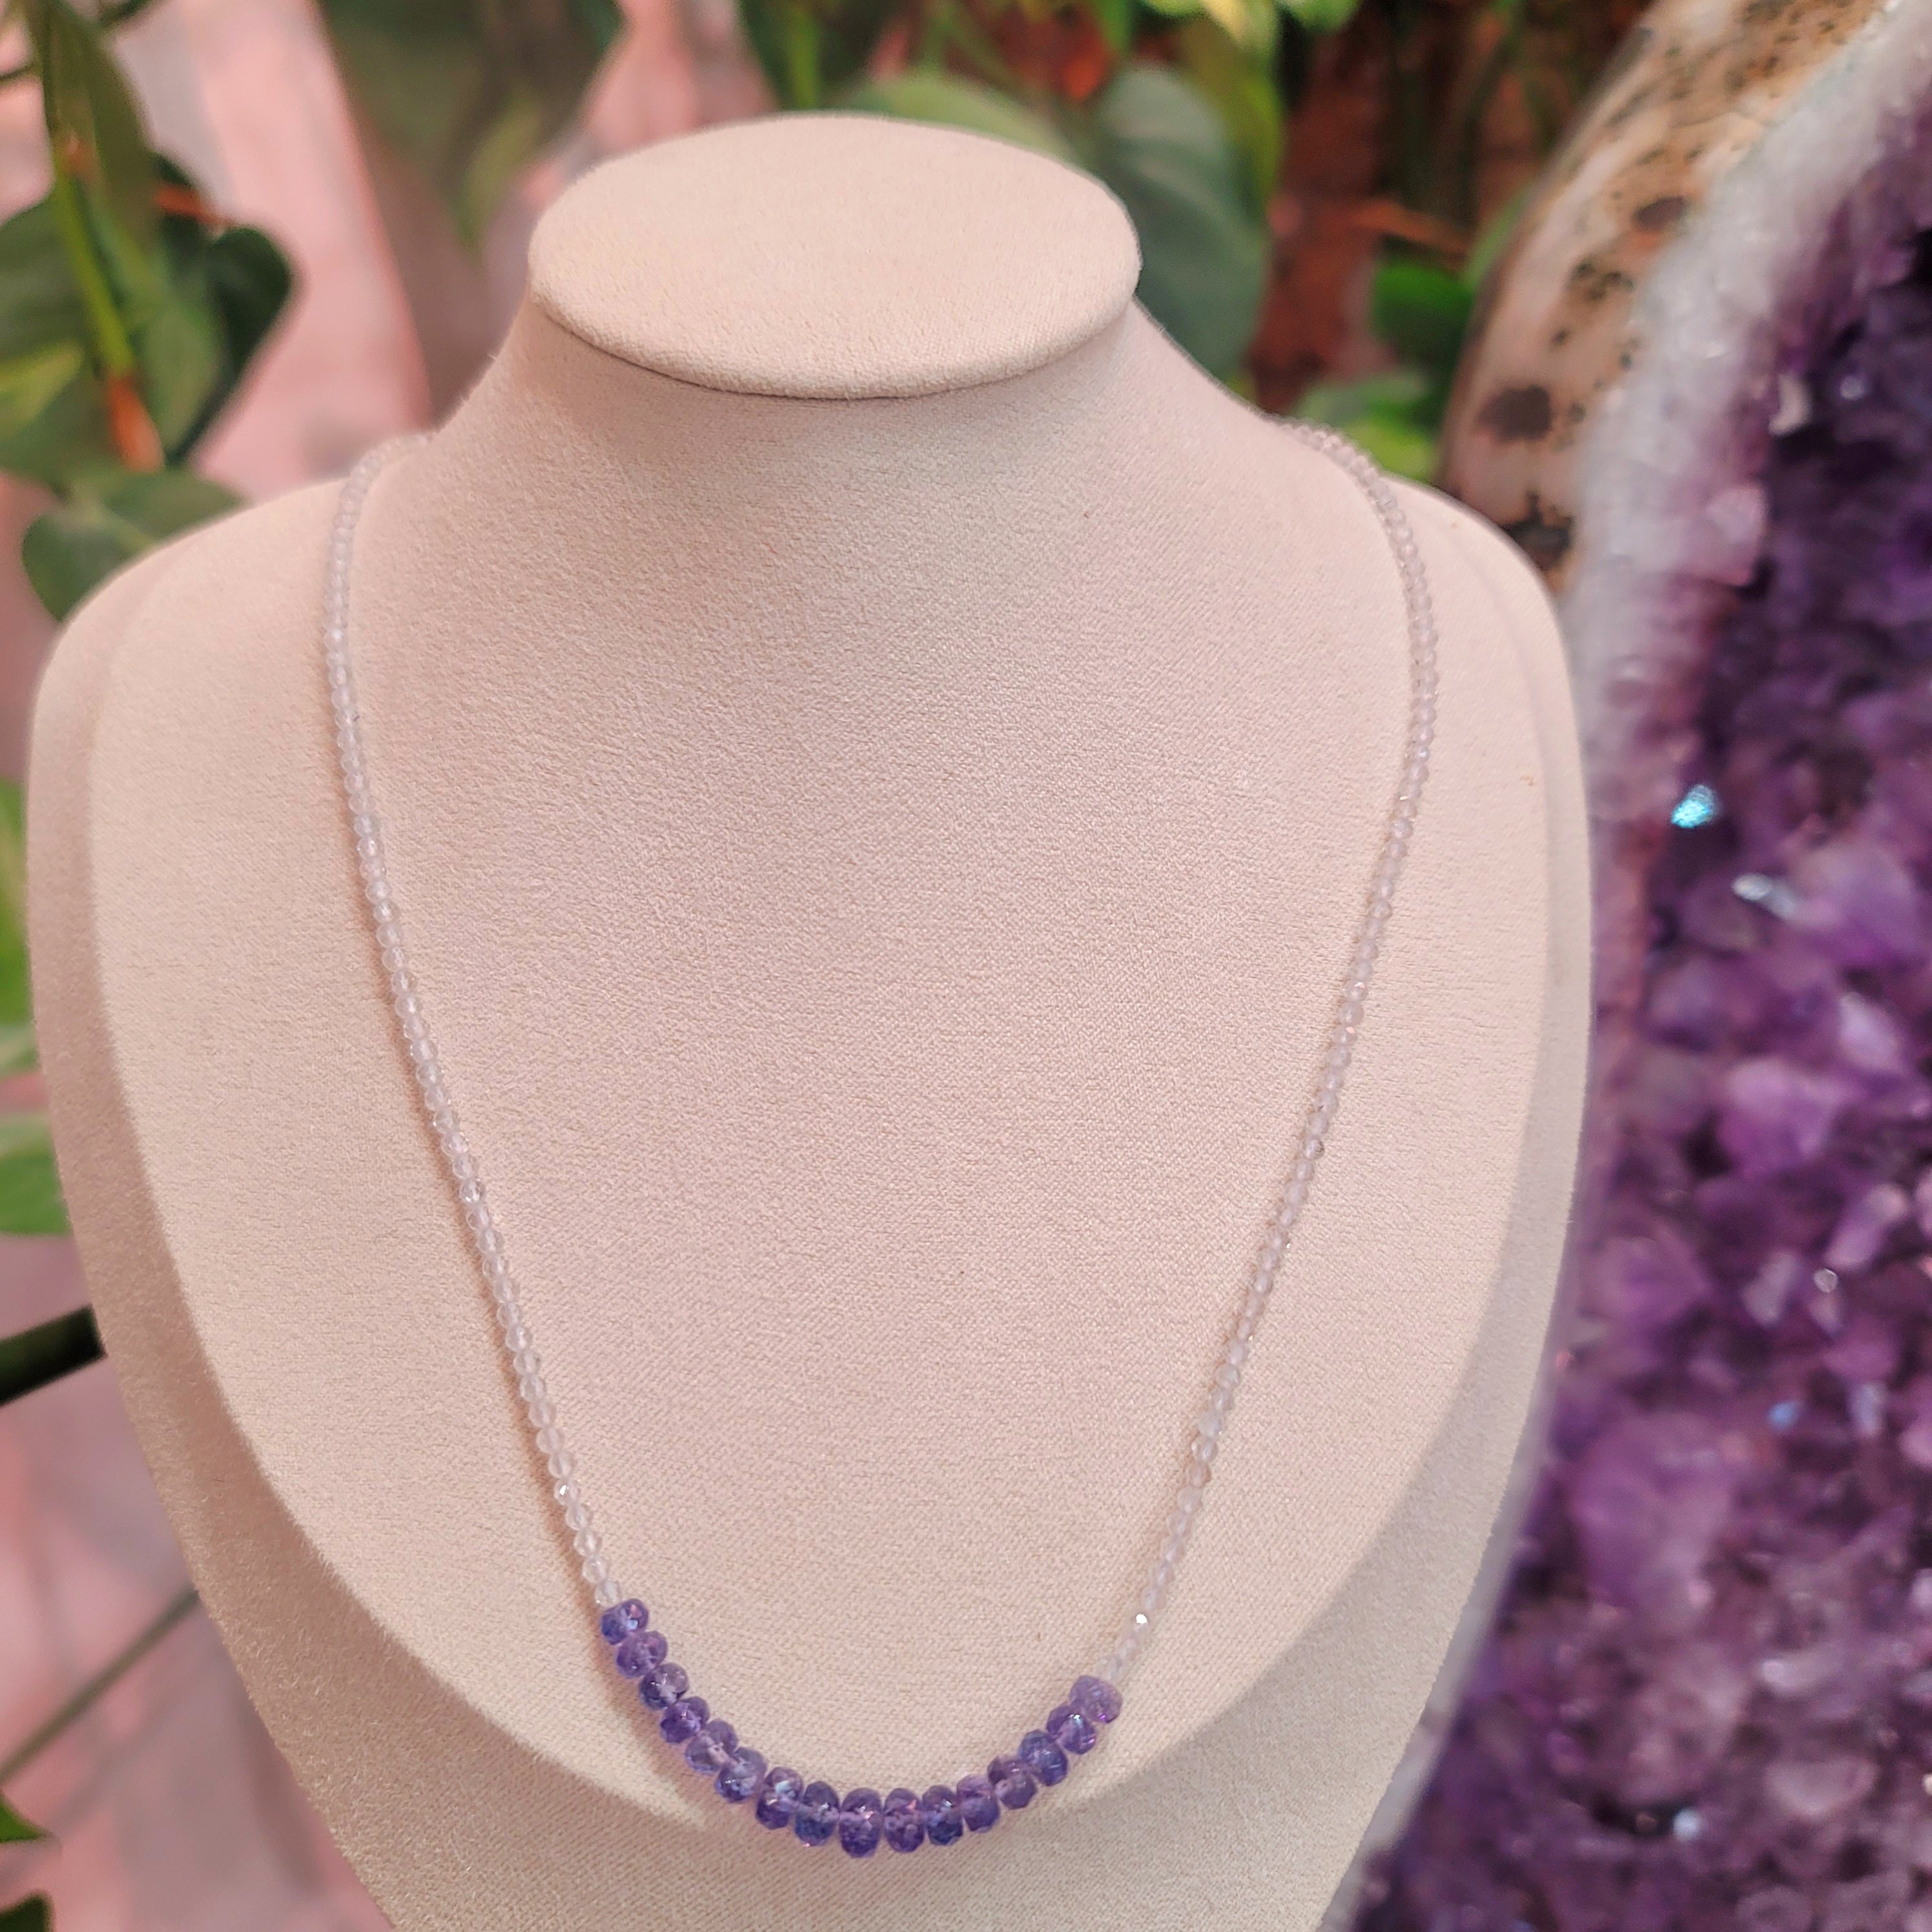 Tanzanite and White Topaz Micro Faceted Necklace for Compassion, Intuition & Raising your Vibration